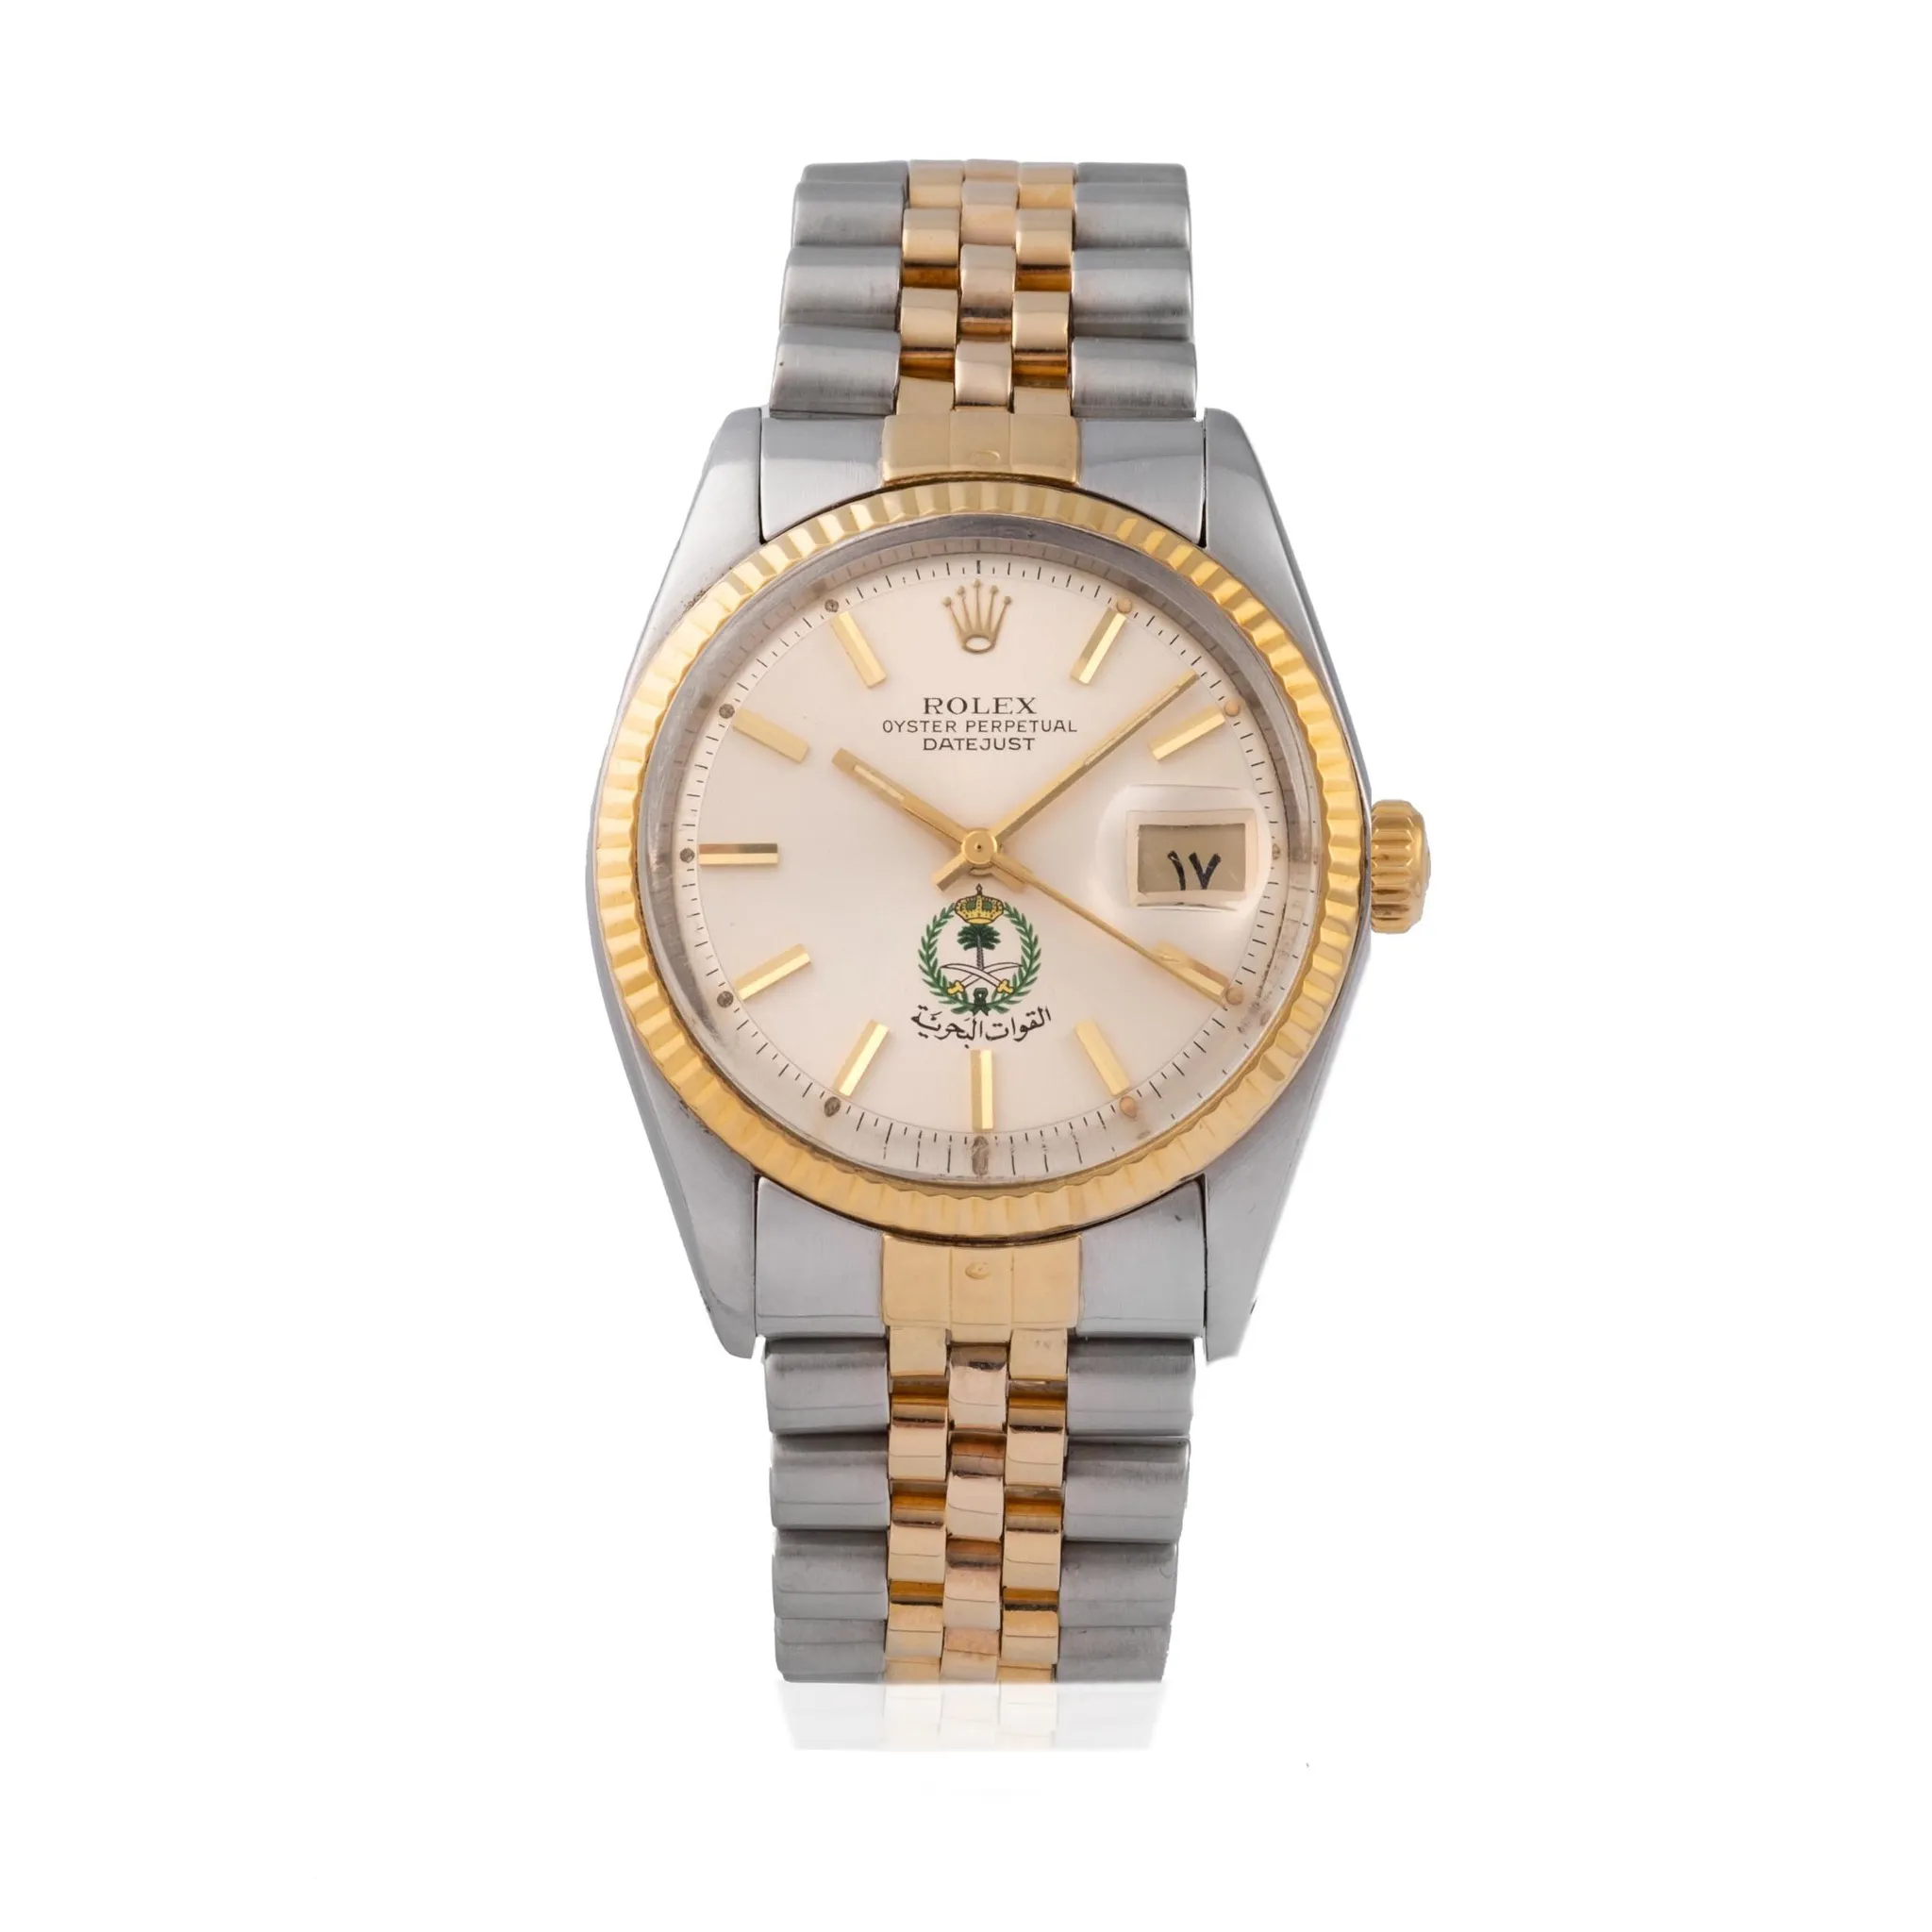 Rolex Datejust 1601F 36mm Yellow gold and stainless steel Silver